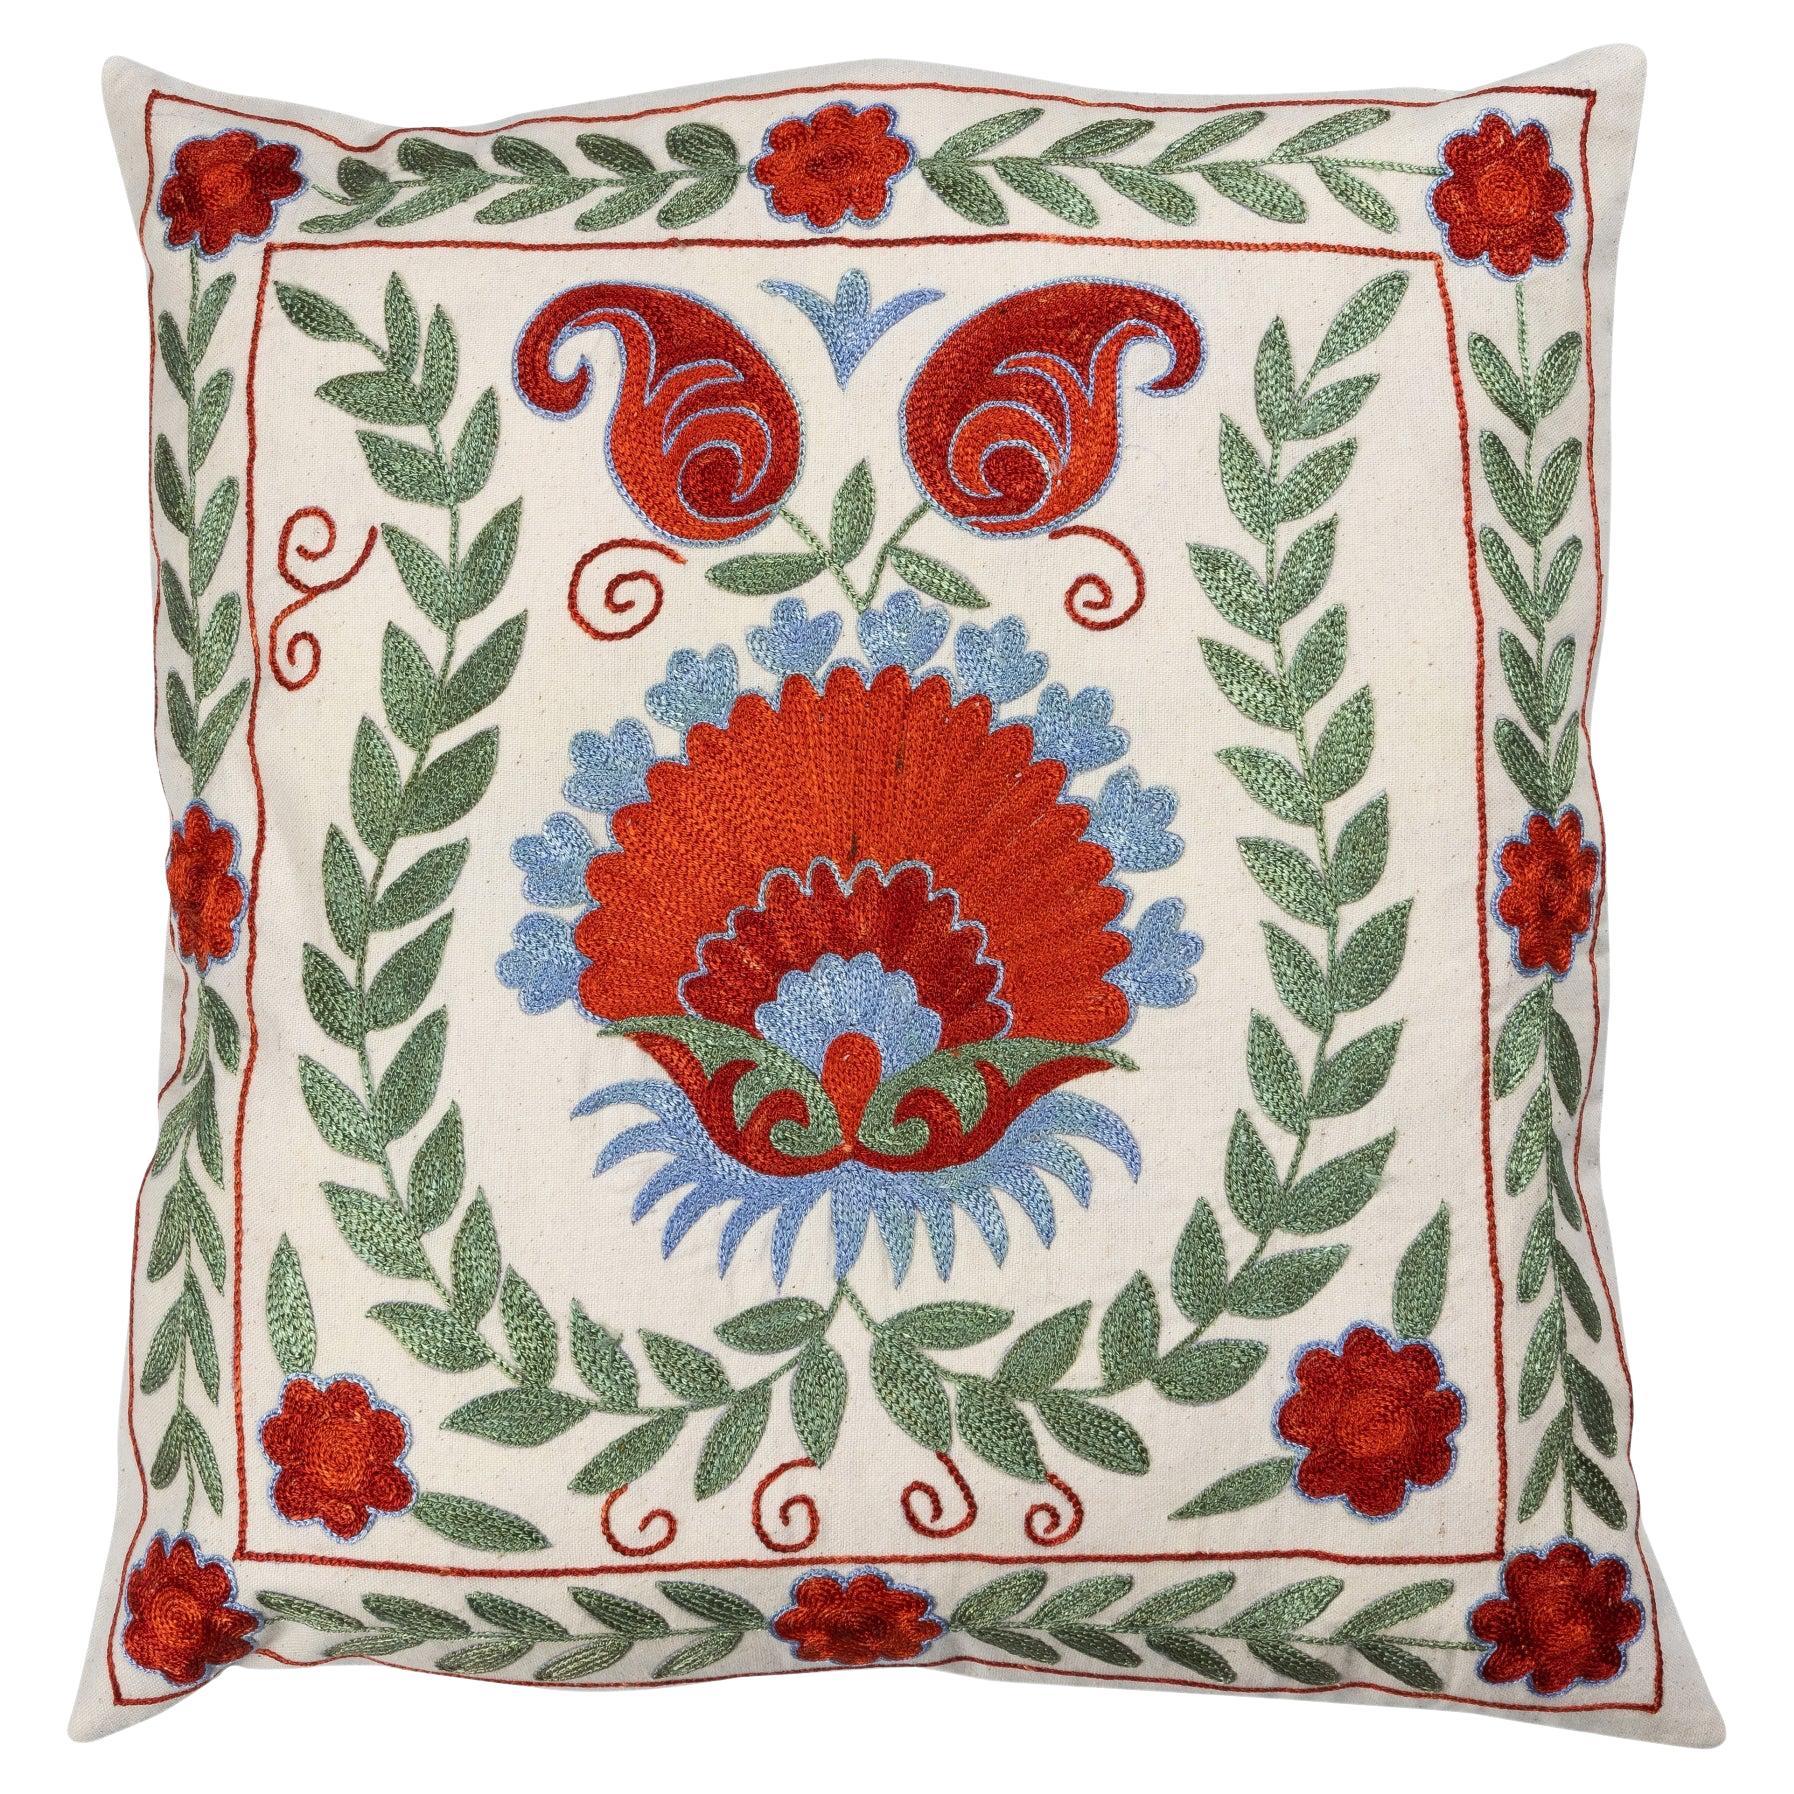 19"x19" Gorgeous Cushion Cover. Throw Pillow, Silk Embroidery Suzani Lace Pillow